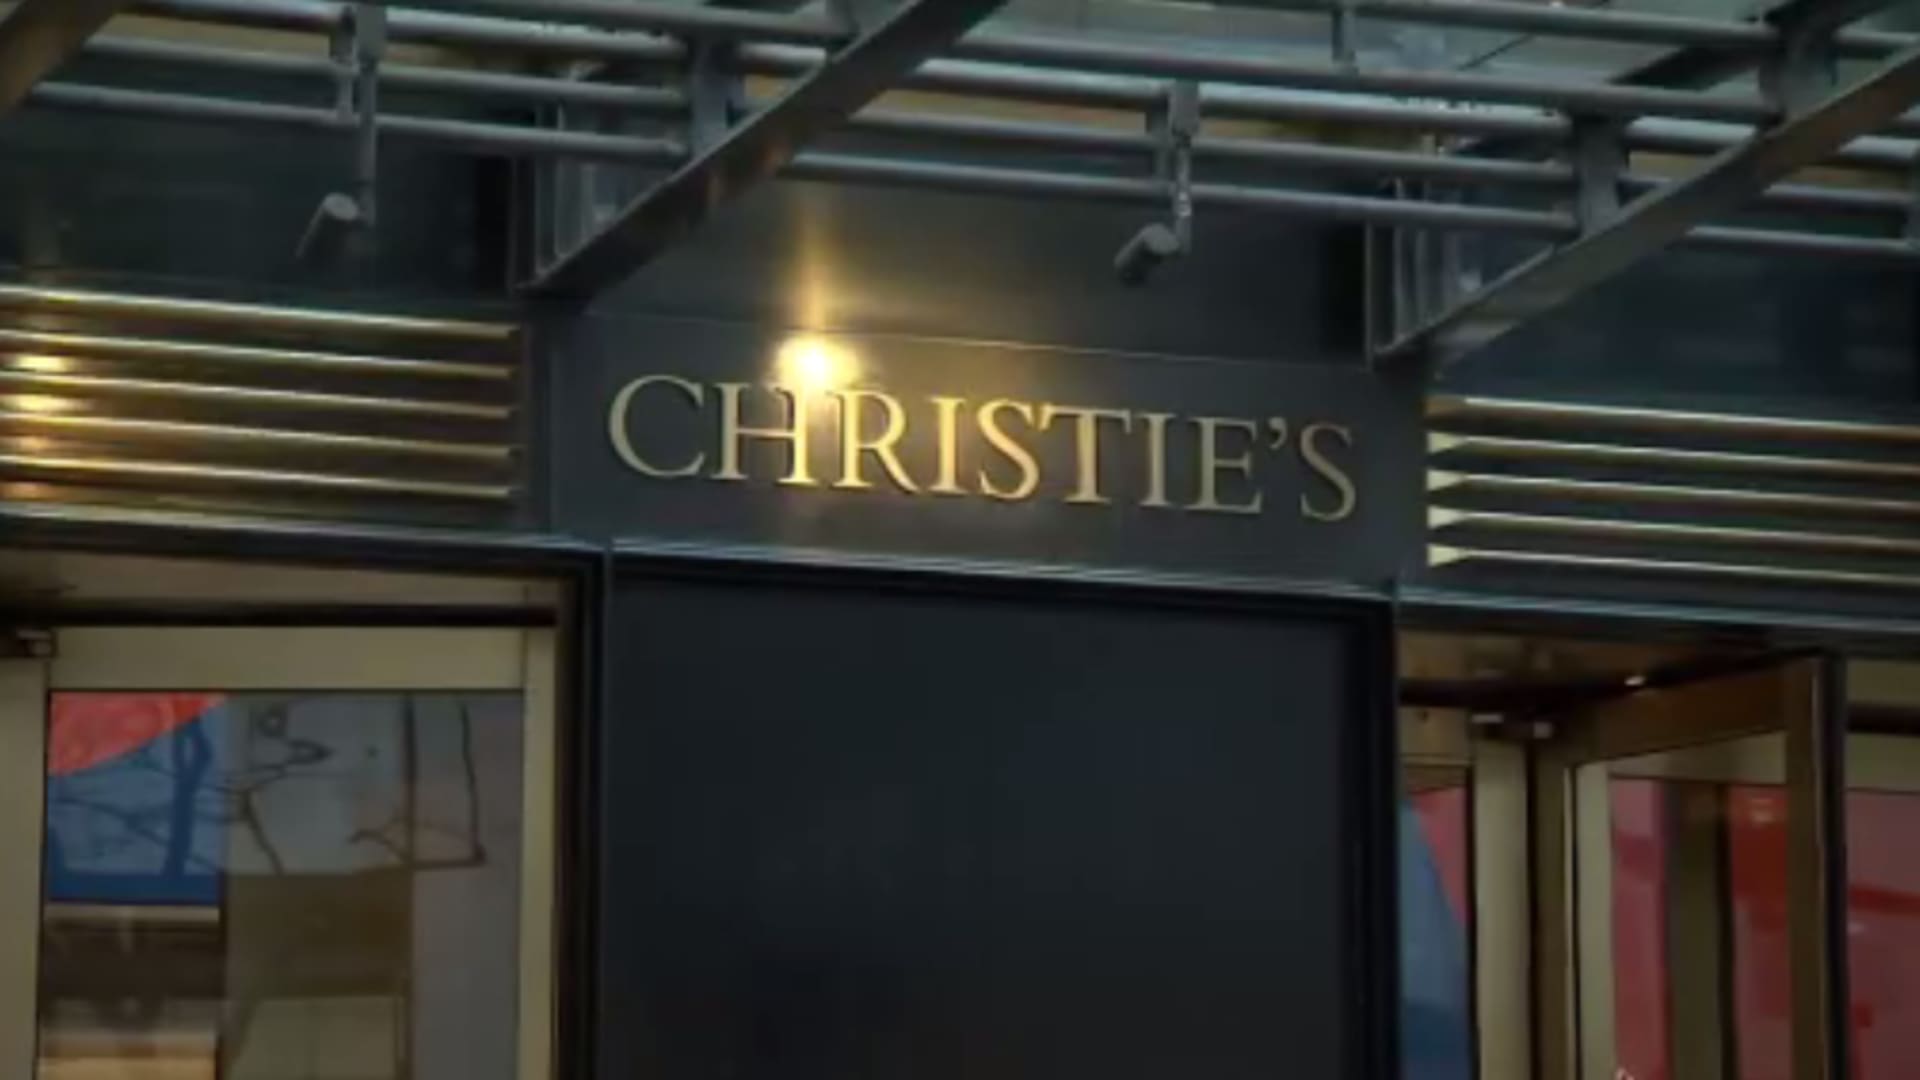 Christie’s just sold a Rothko painting for $100 million in a secret sale. Here are the details